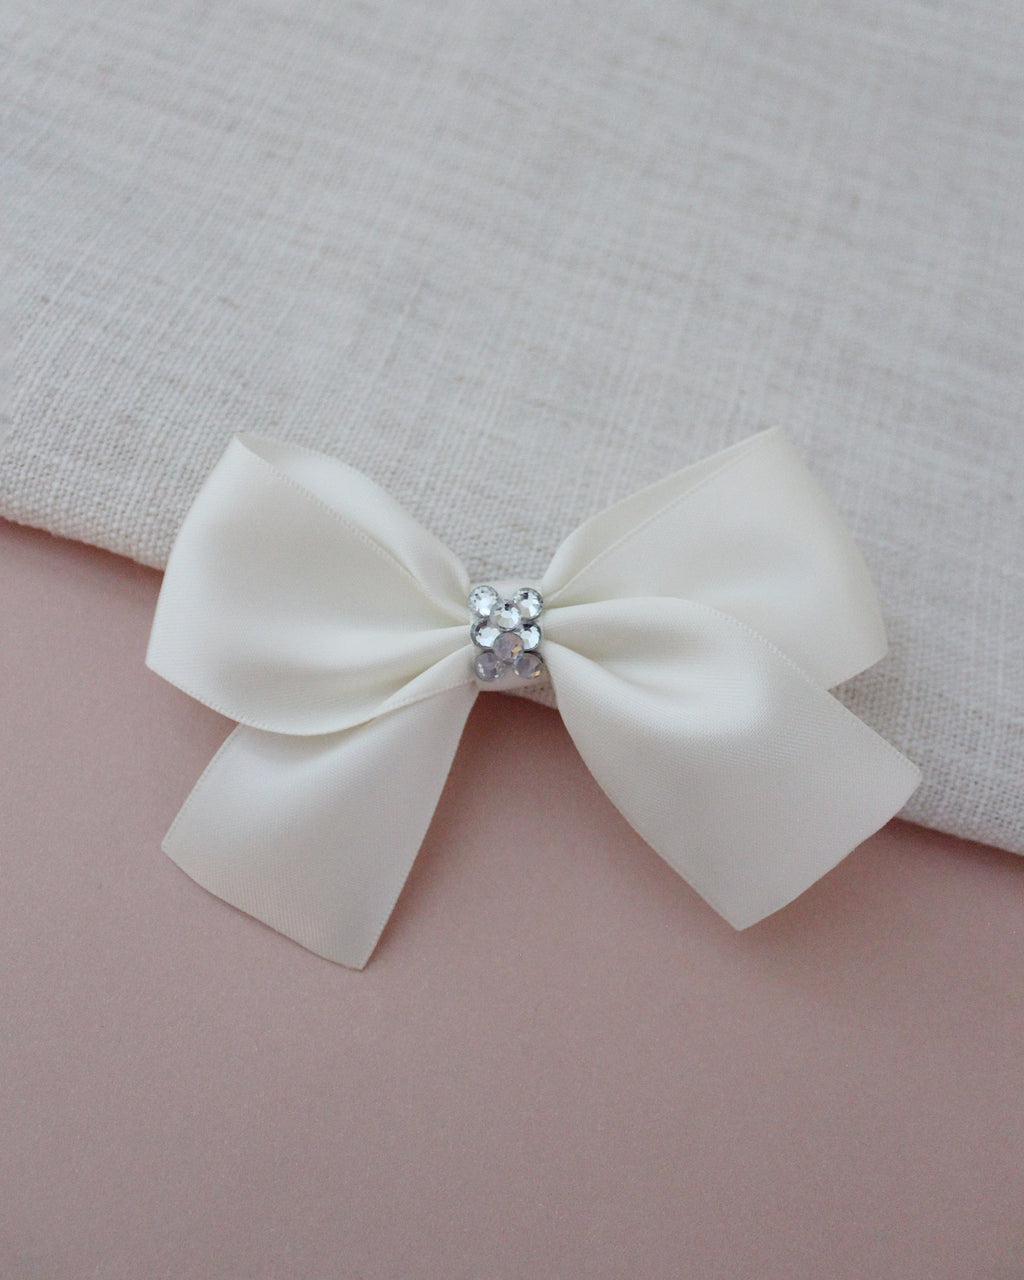 Large Satin Hair Bow with Pearl Rhinestone Center